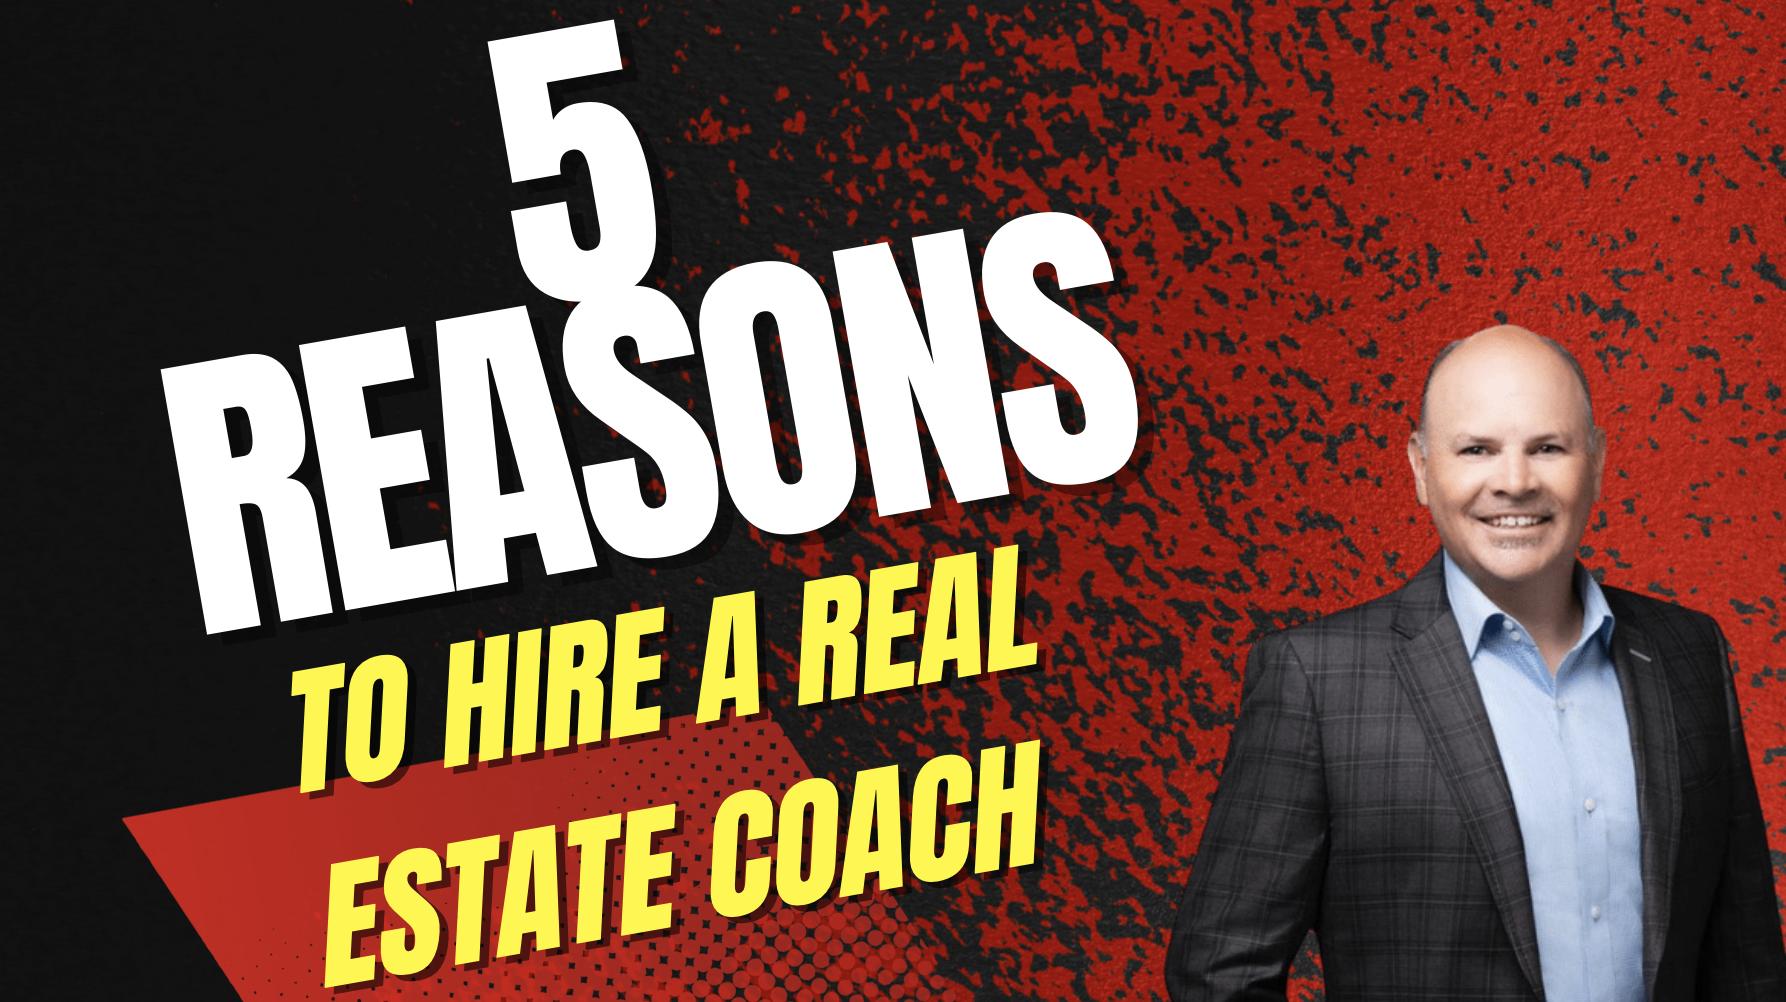 5 reasons to hire a real estate coach - Aaron zapata